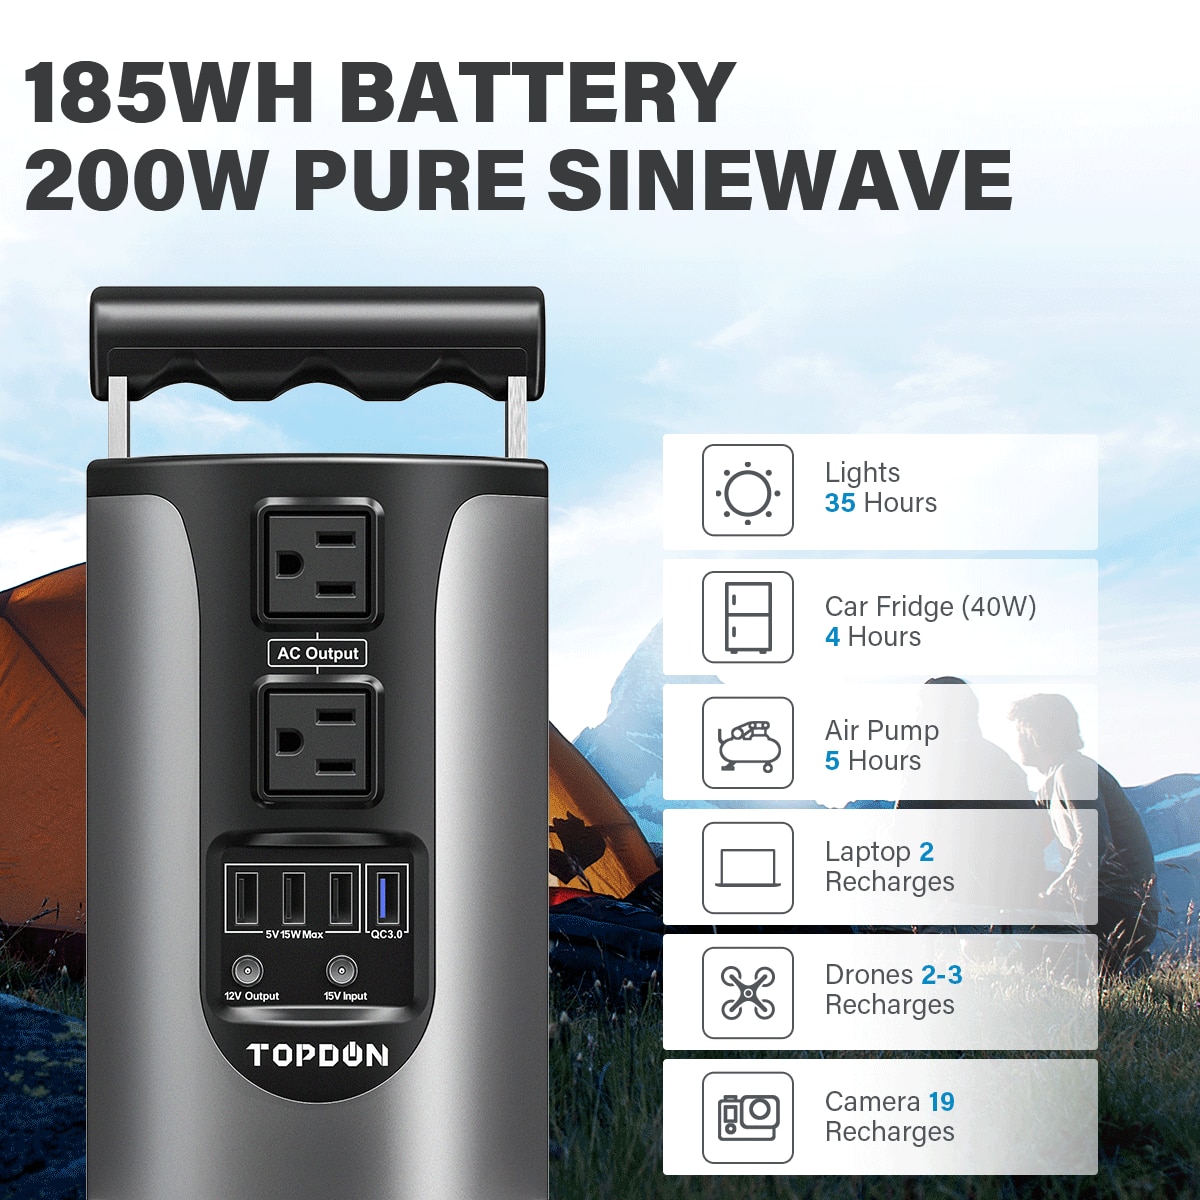 Topdon-H200-Portable-Energy-Storage-Power-Supply-185WH-Capacity-200W-Pure-Sinesave-Energy-Storage-Power-Supply-With-4-USB-Ports-1005002130052063